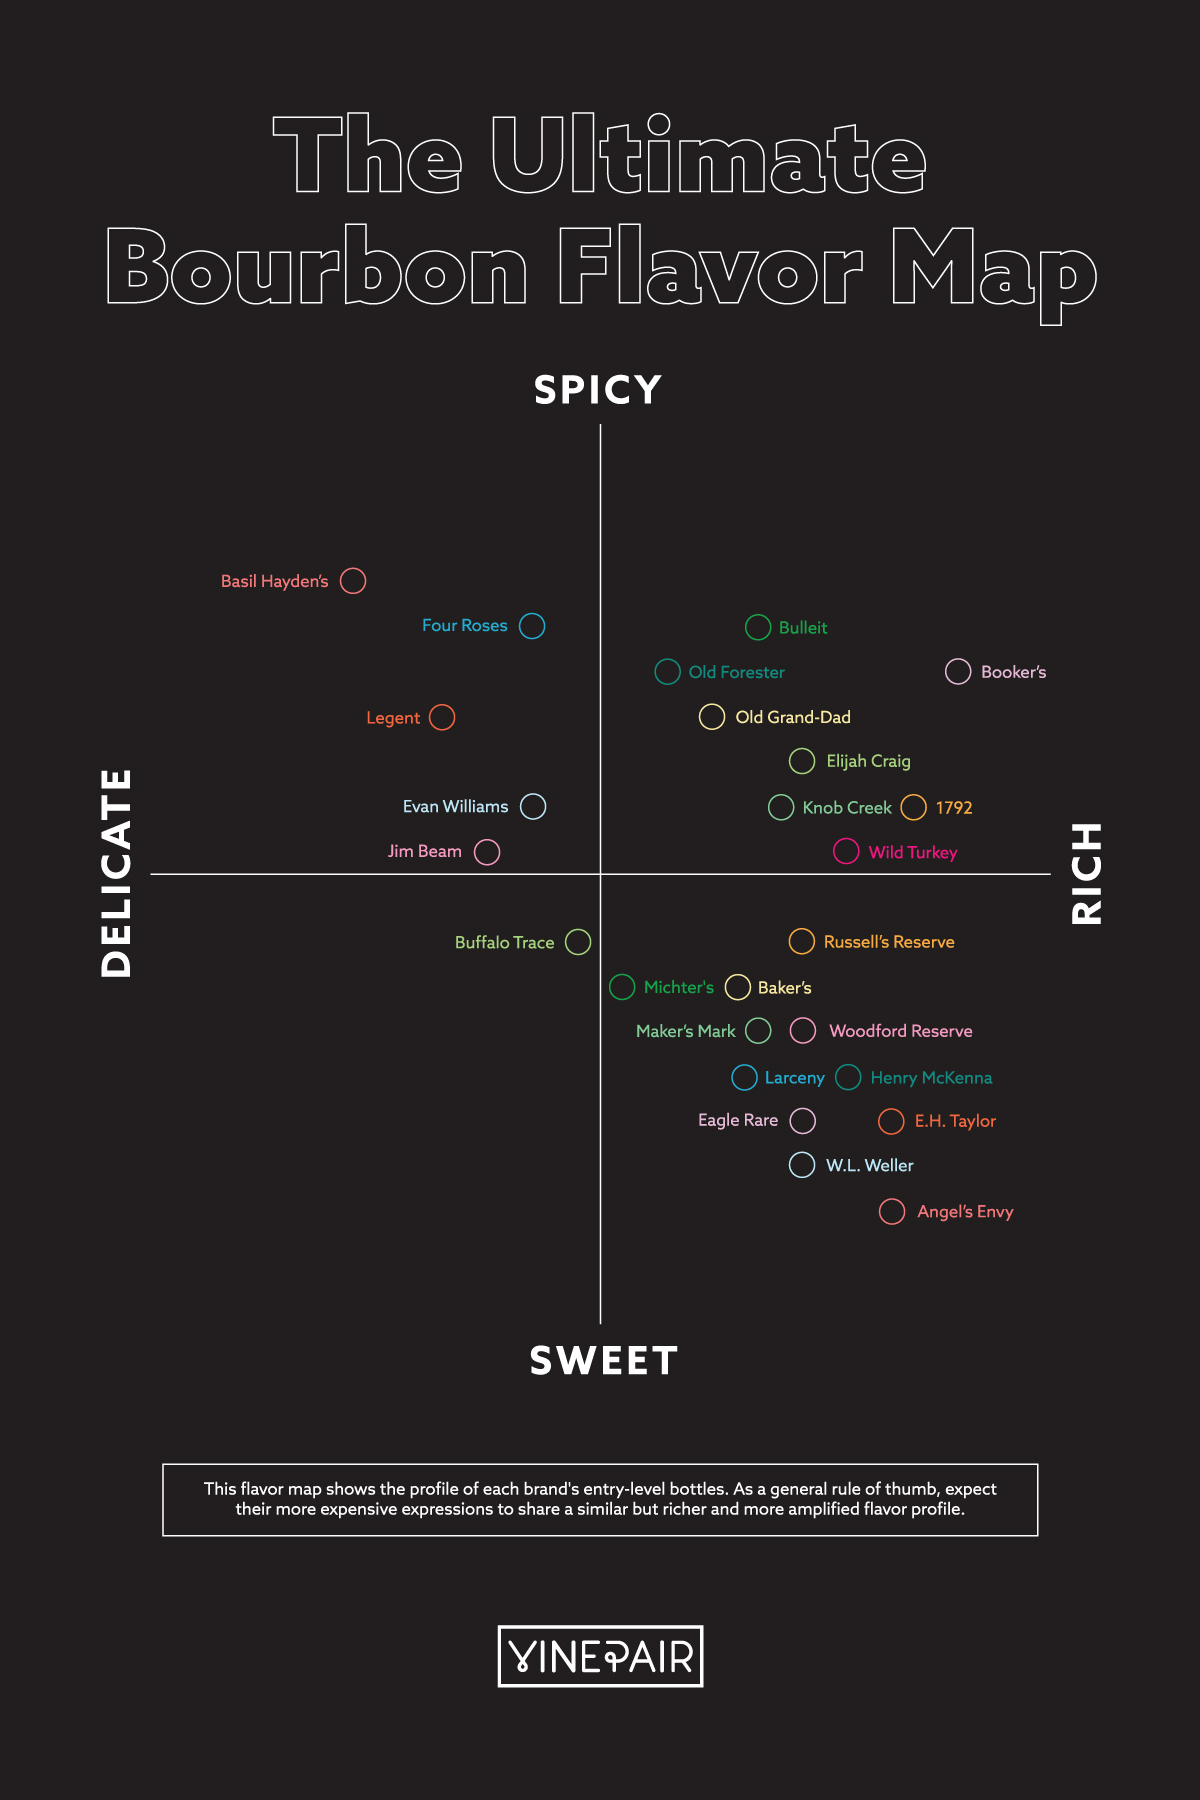 Learn about bourbon with this flavor map.